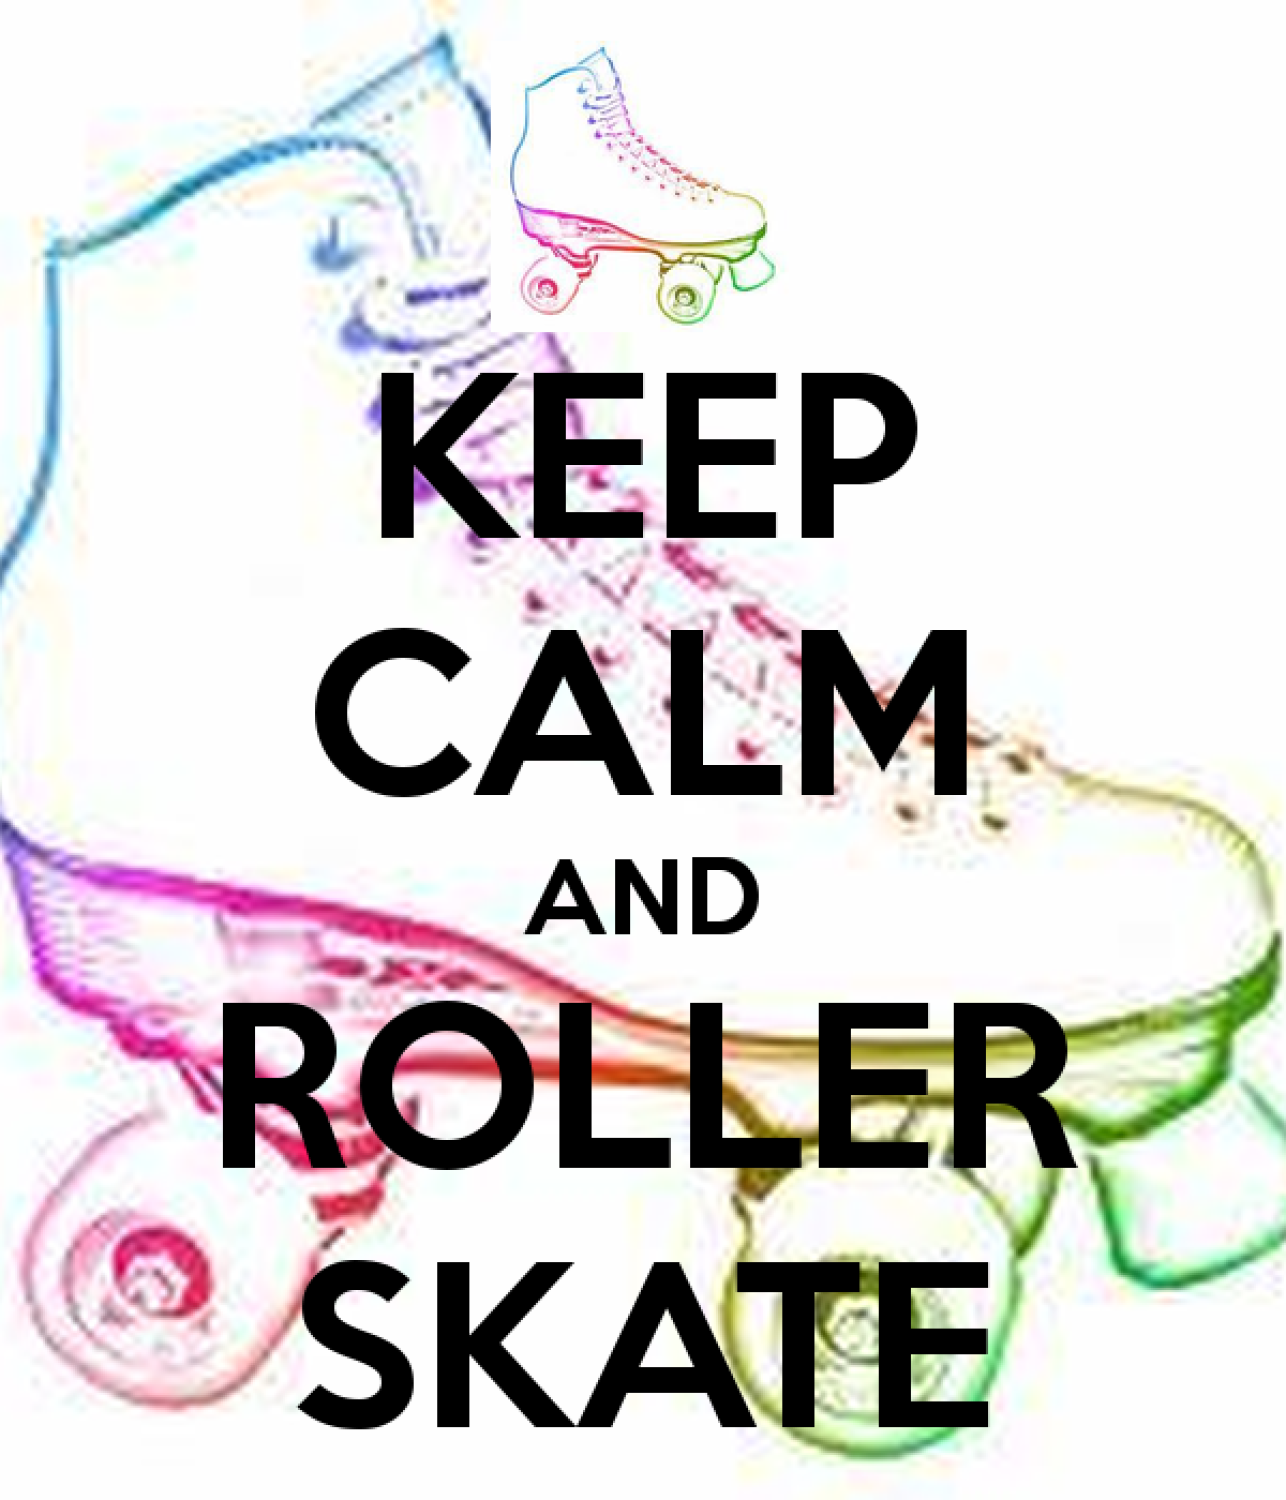 Keep Calm and Roller Skate